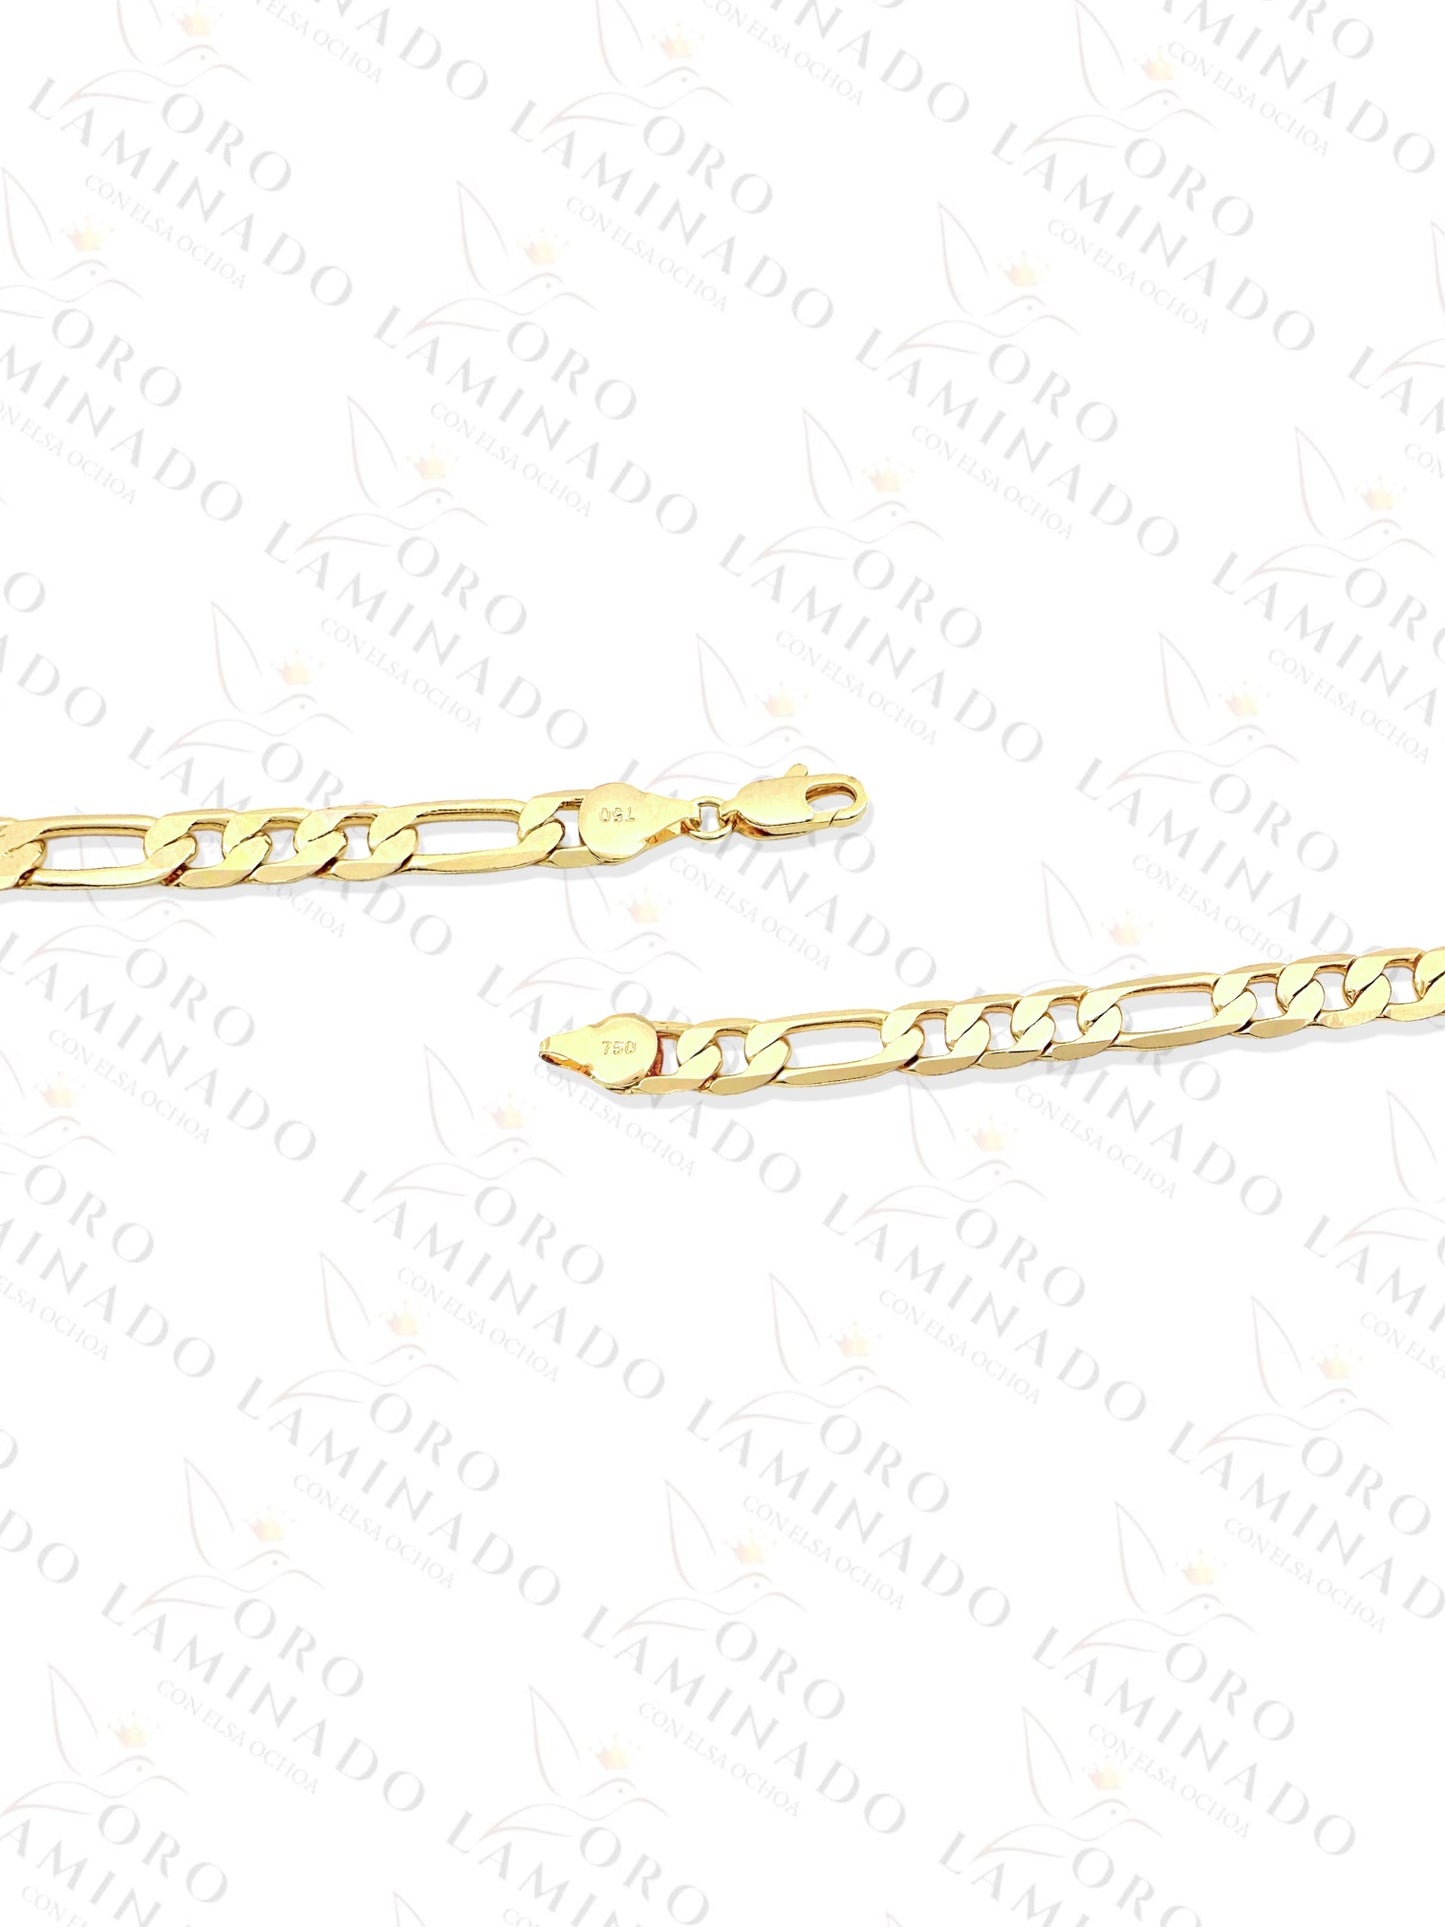 Figaro Chains Pack of 3 Size 26" 8mm Y405